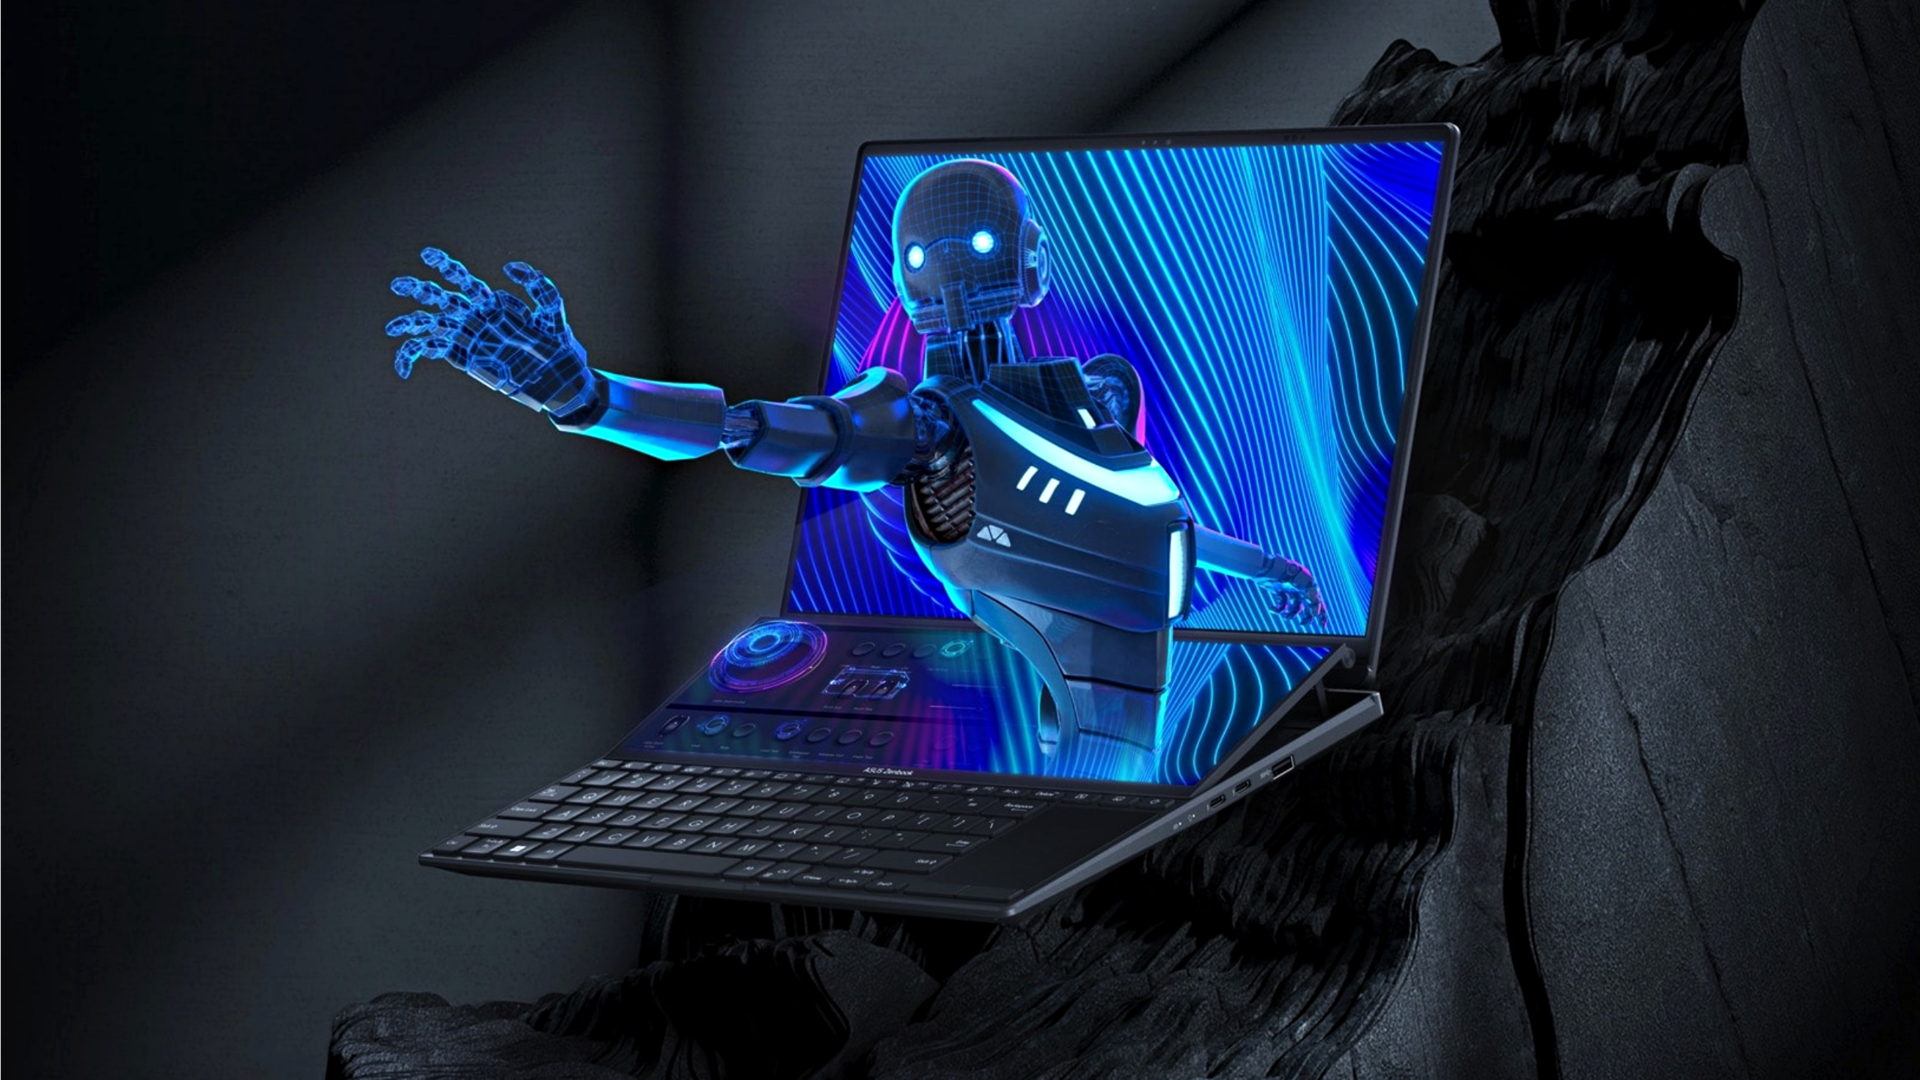 Top 5 OLED laptops you can buy in India